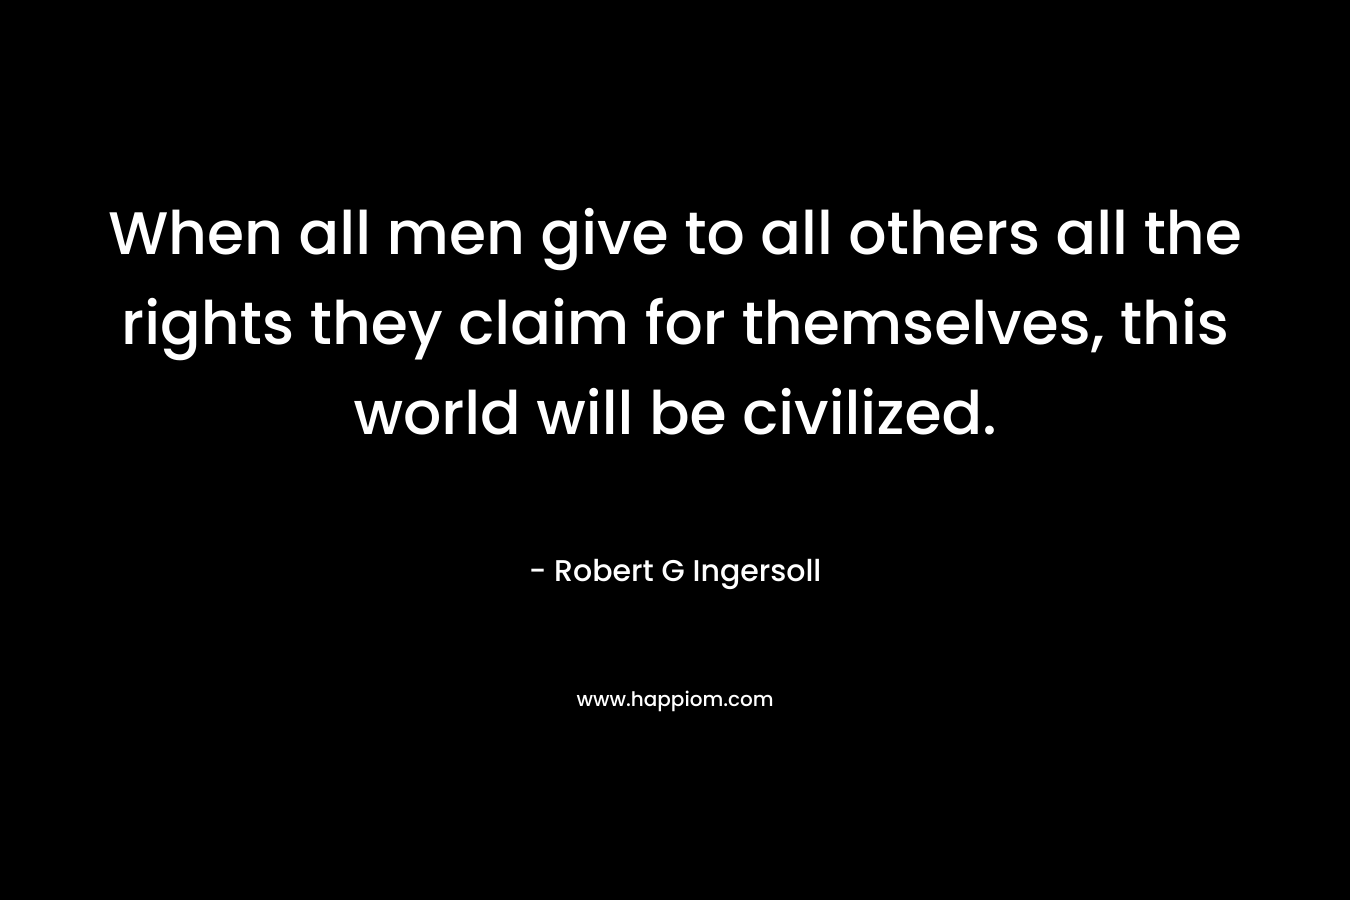 When all men give to all others all the rights they claim for themselves, this world will be civilized.